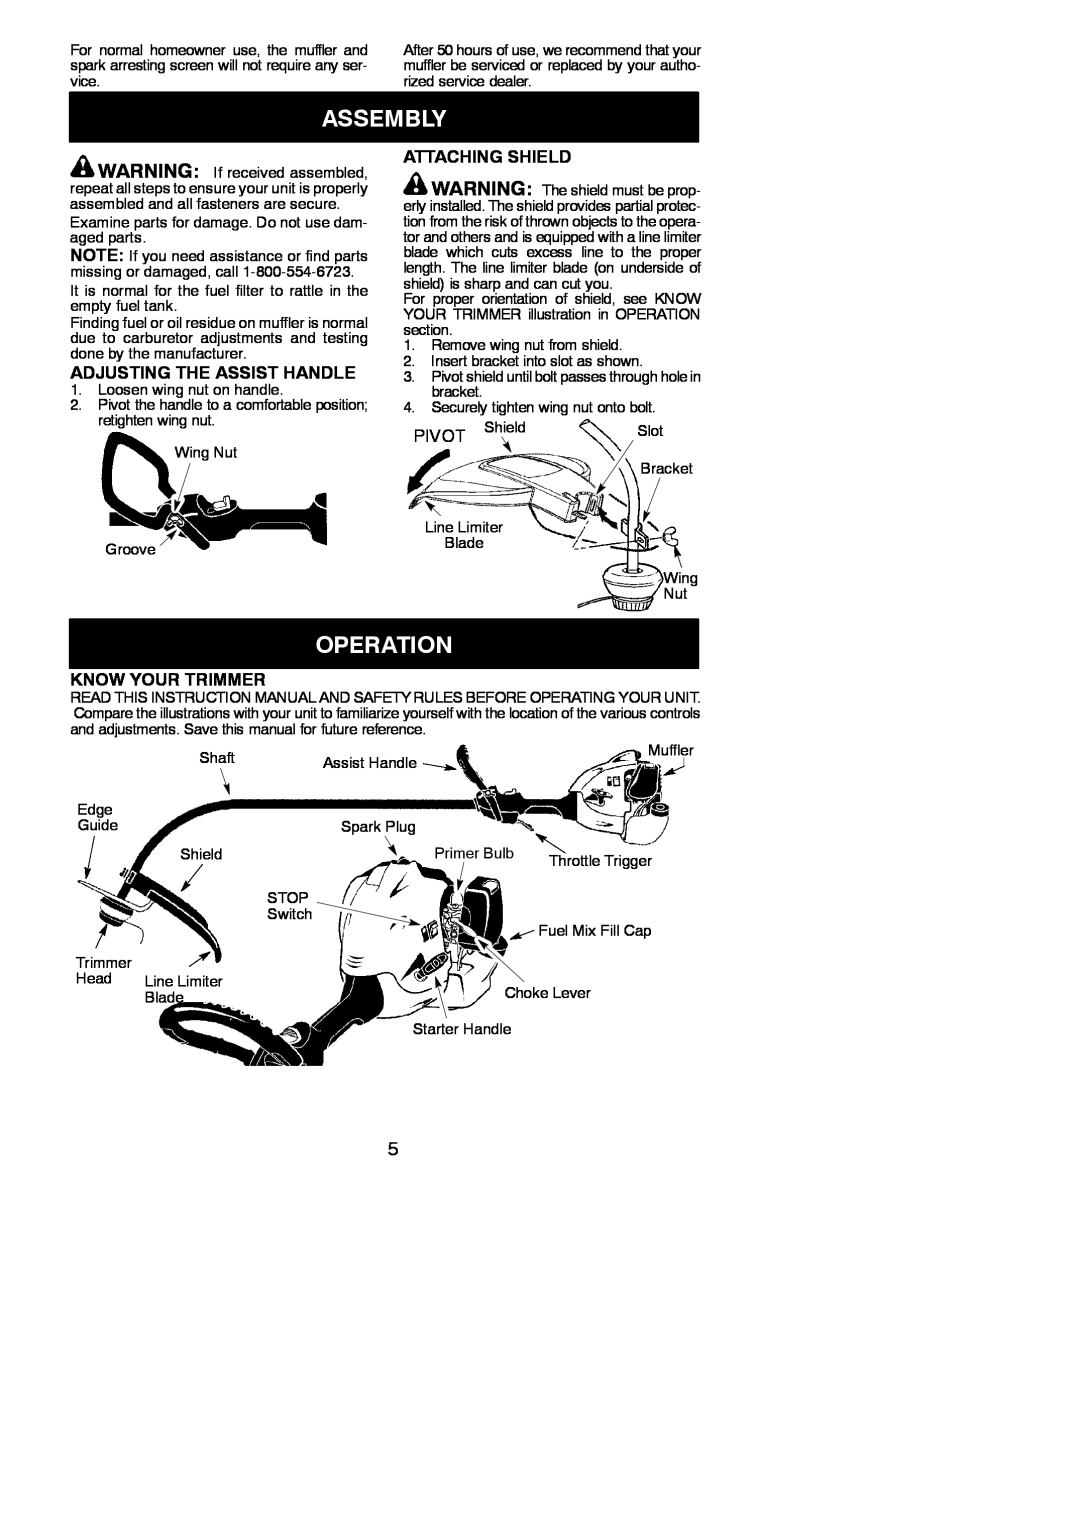 Weed Eater 545186833 Assembly, Operation, Adjusting The Assist Handle, Attaching Shield, PIVOT Shield, Know Your Trimmer 